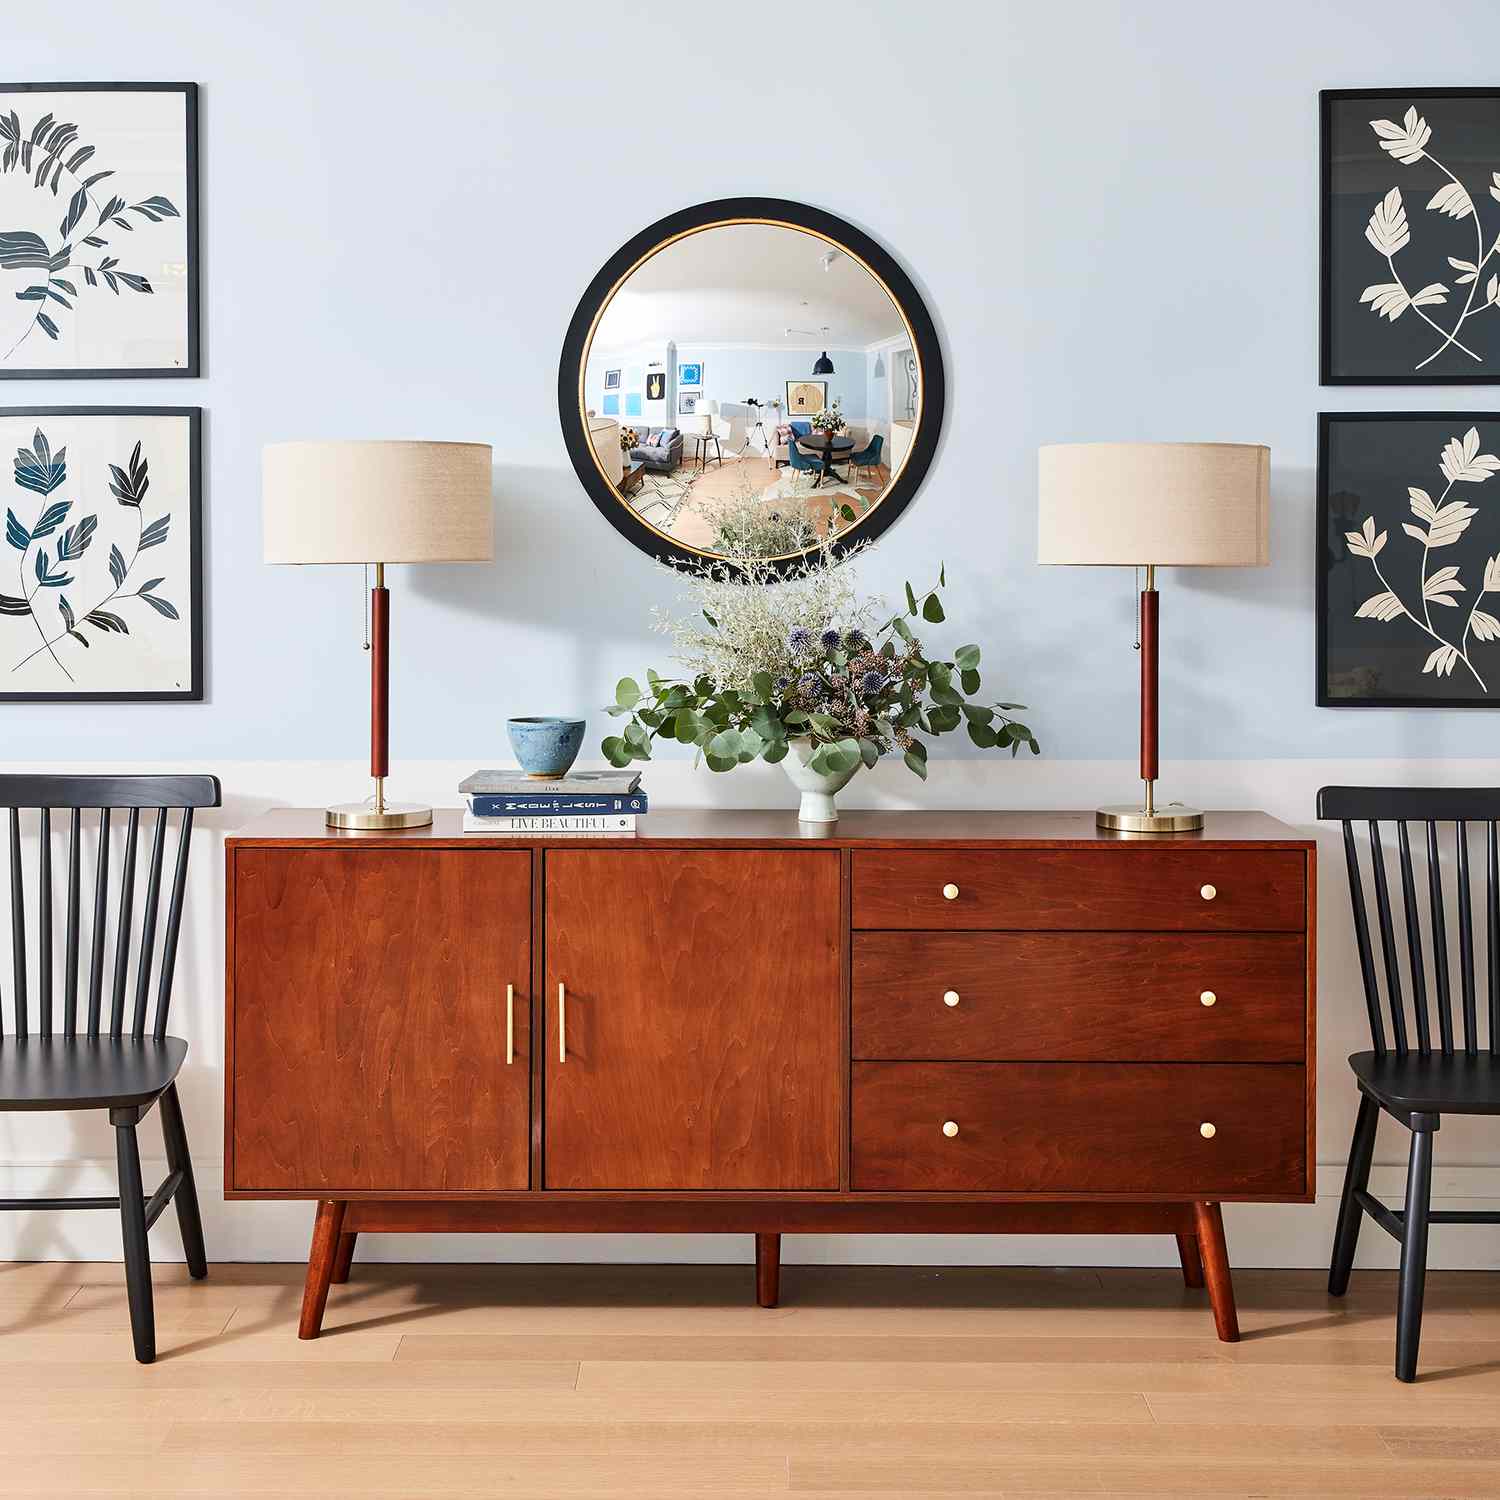 2020 Real Simple Home Tour: Sideboard